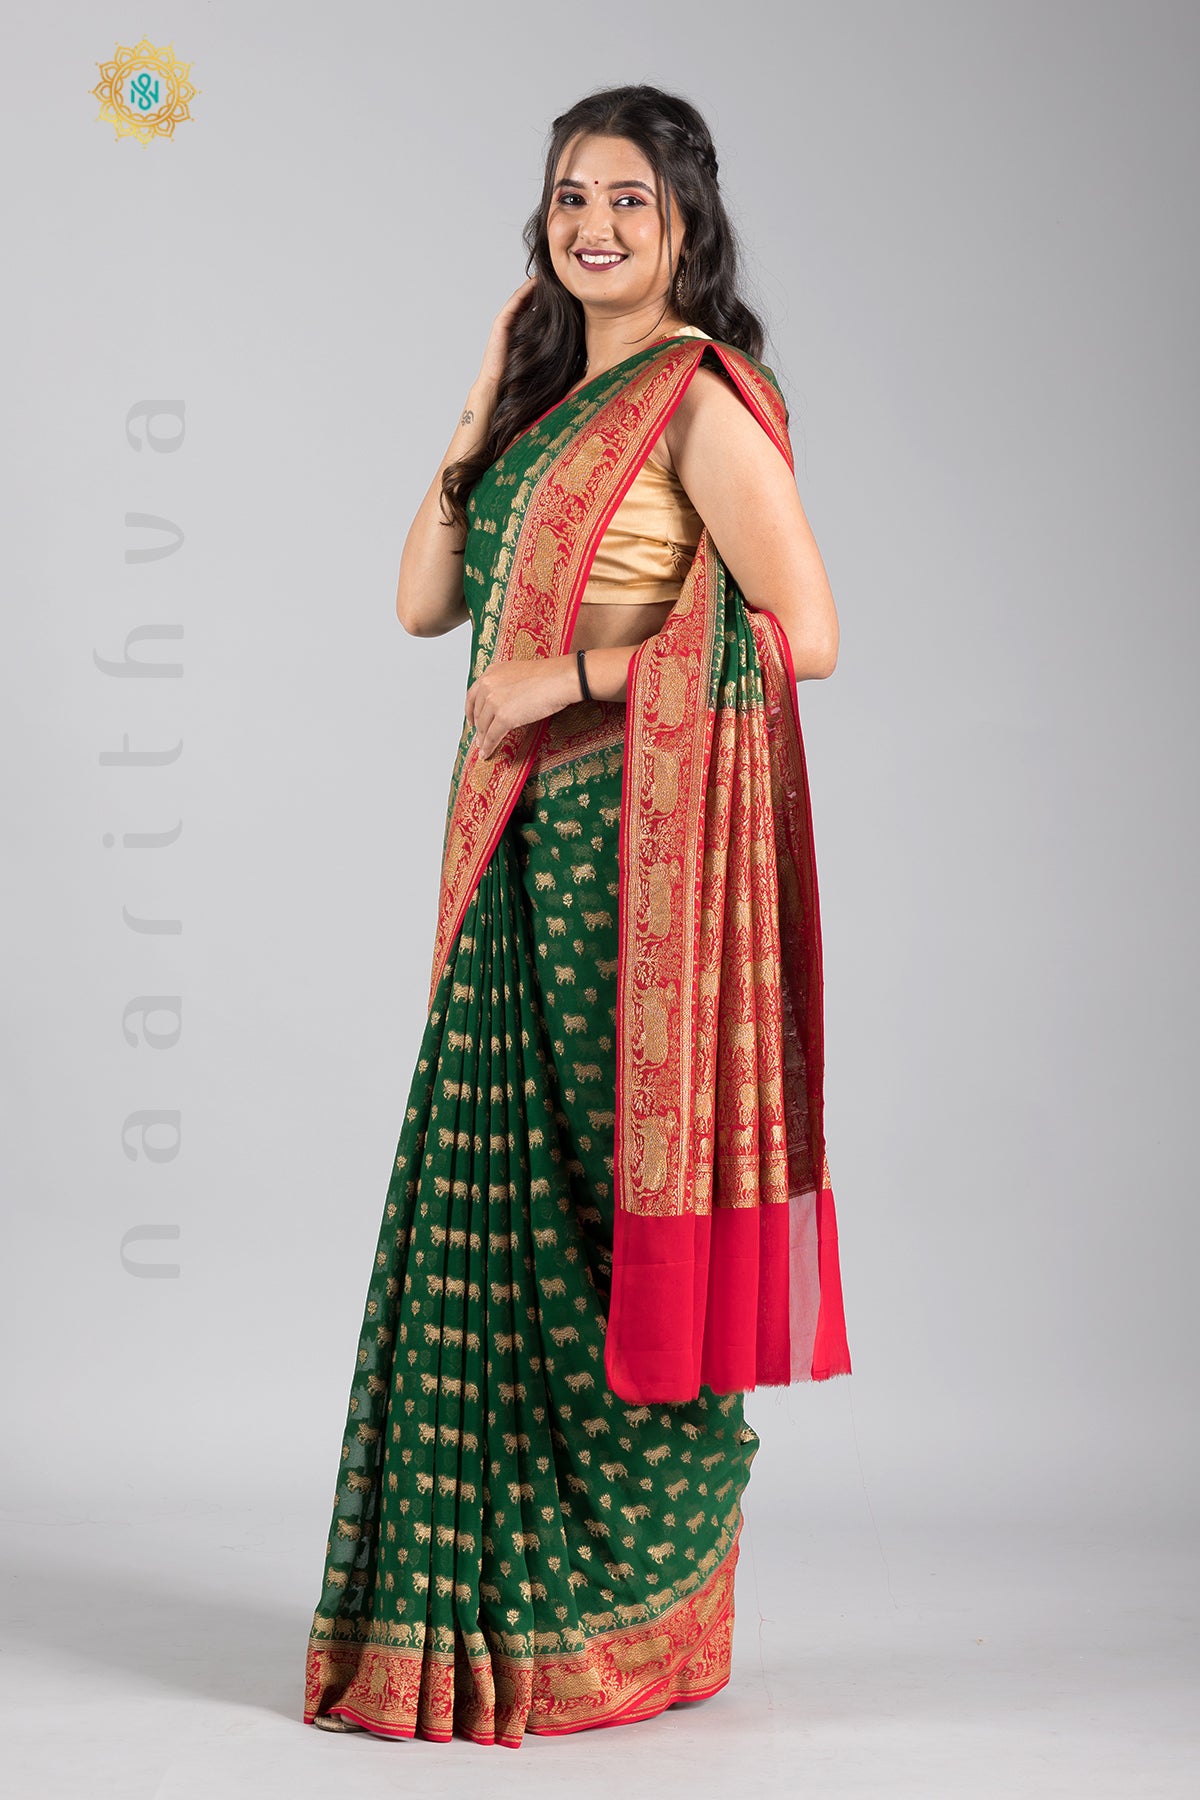 GREEN WITH RED - PURE HANDLOOM GEORGETTE BANARAS IN PICHWAI ANTIQUE ZARI WEAVING WITH CONTRAST BORDER & BLOUSE